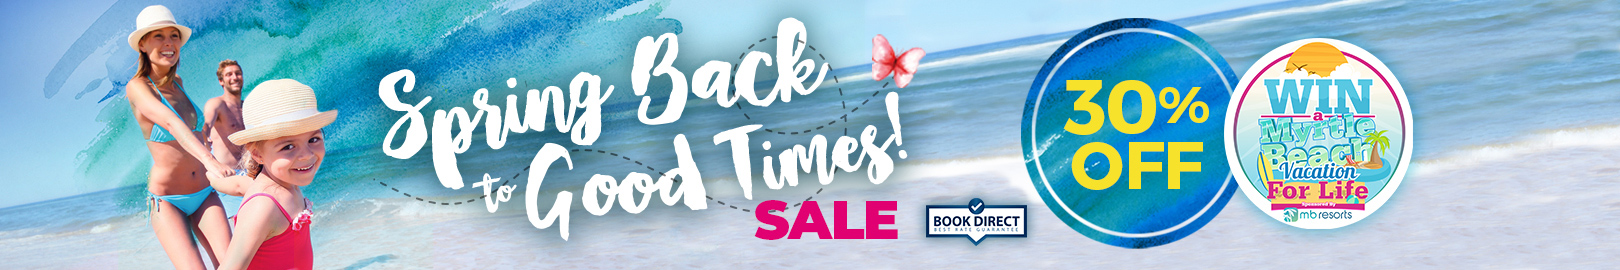 Spring Back to Good Times - 30% Off